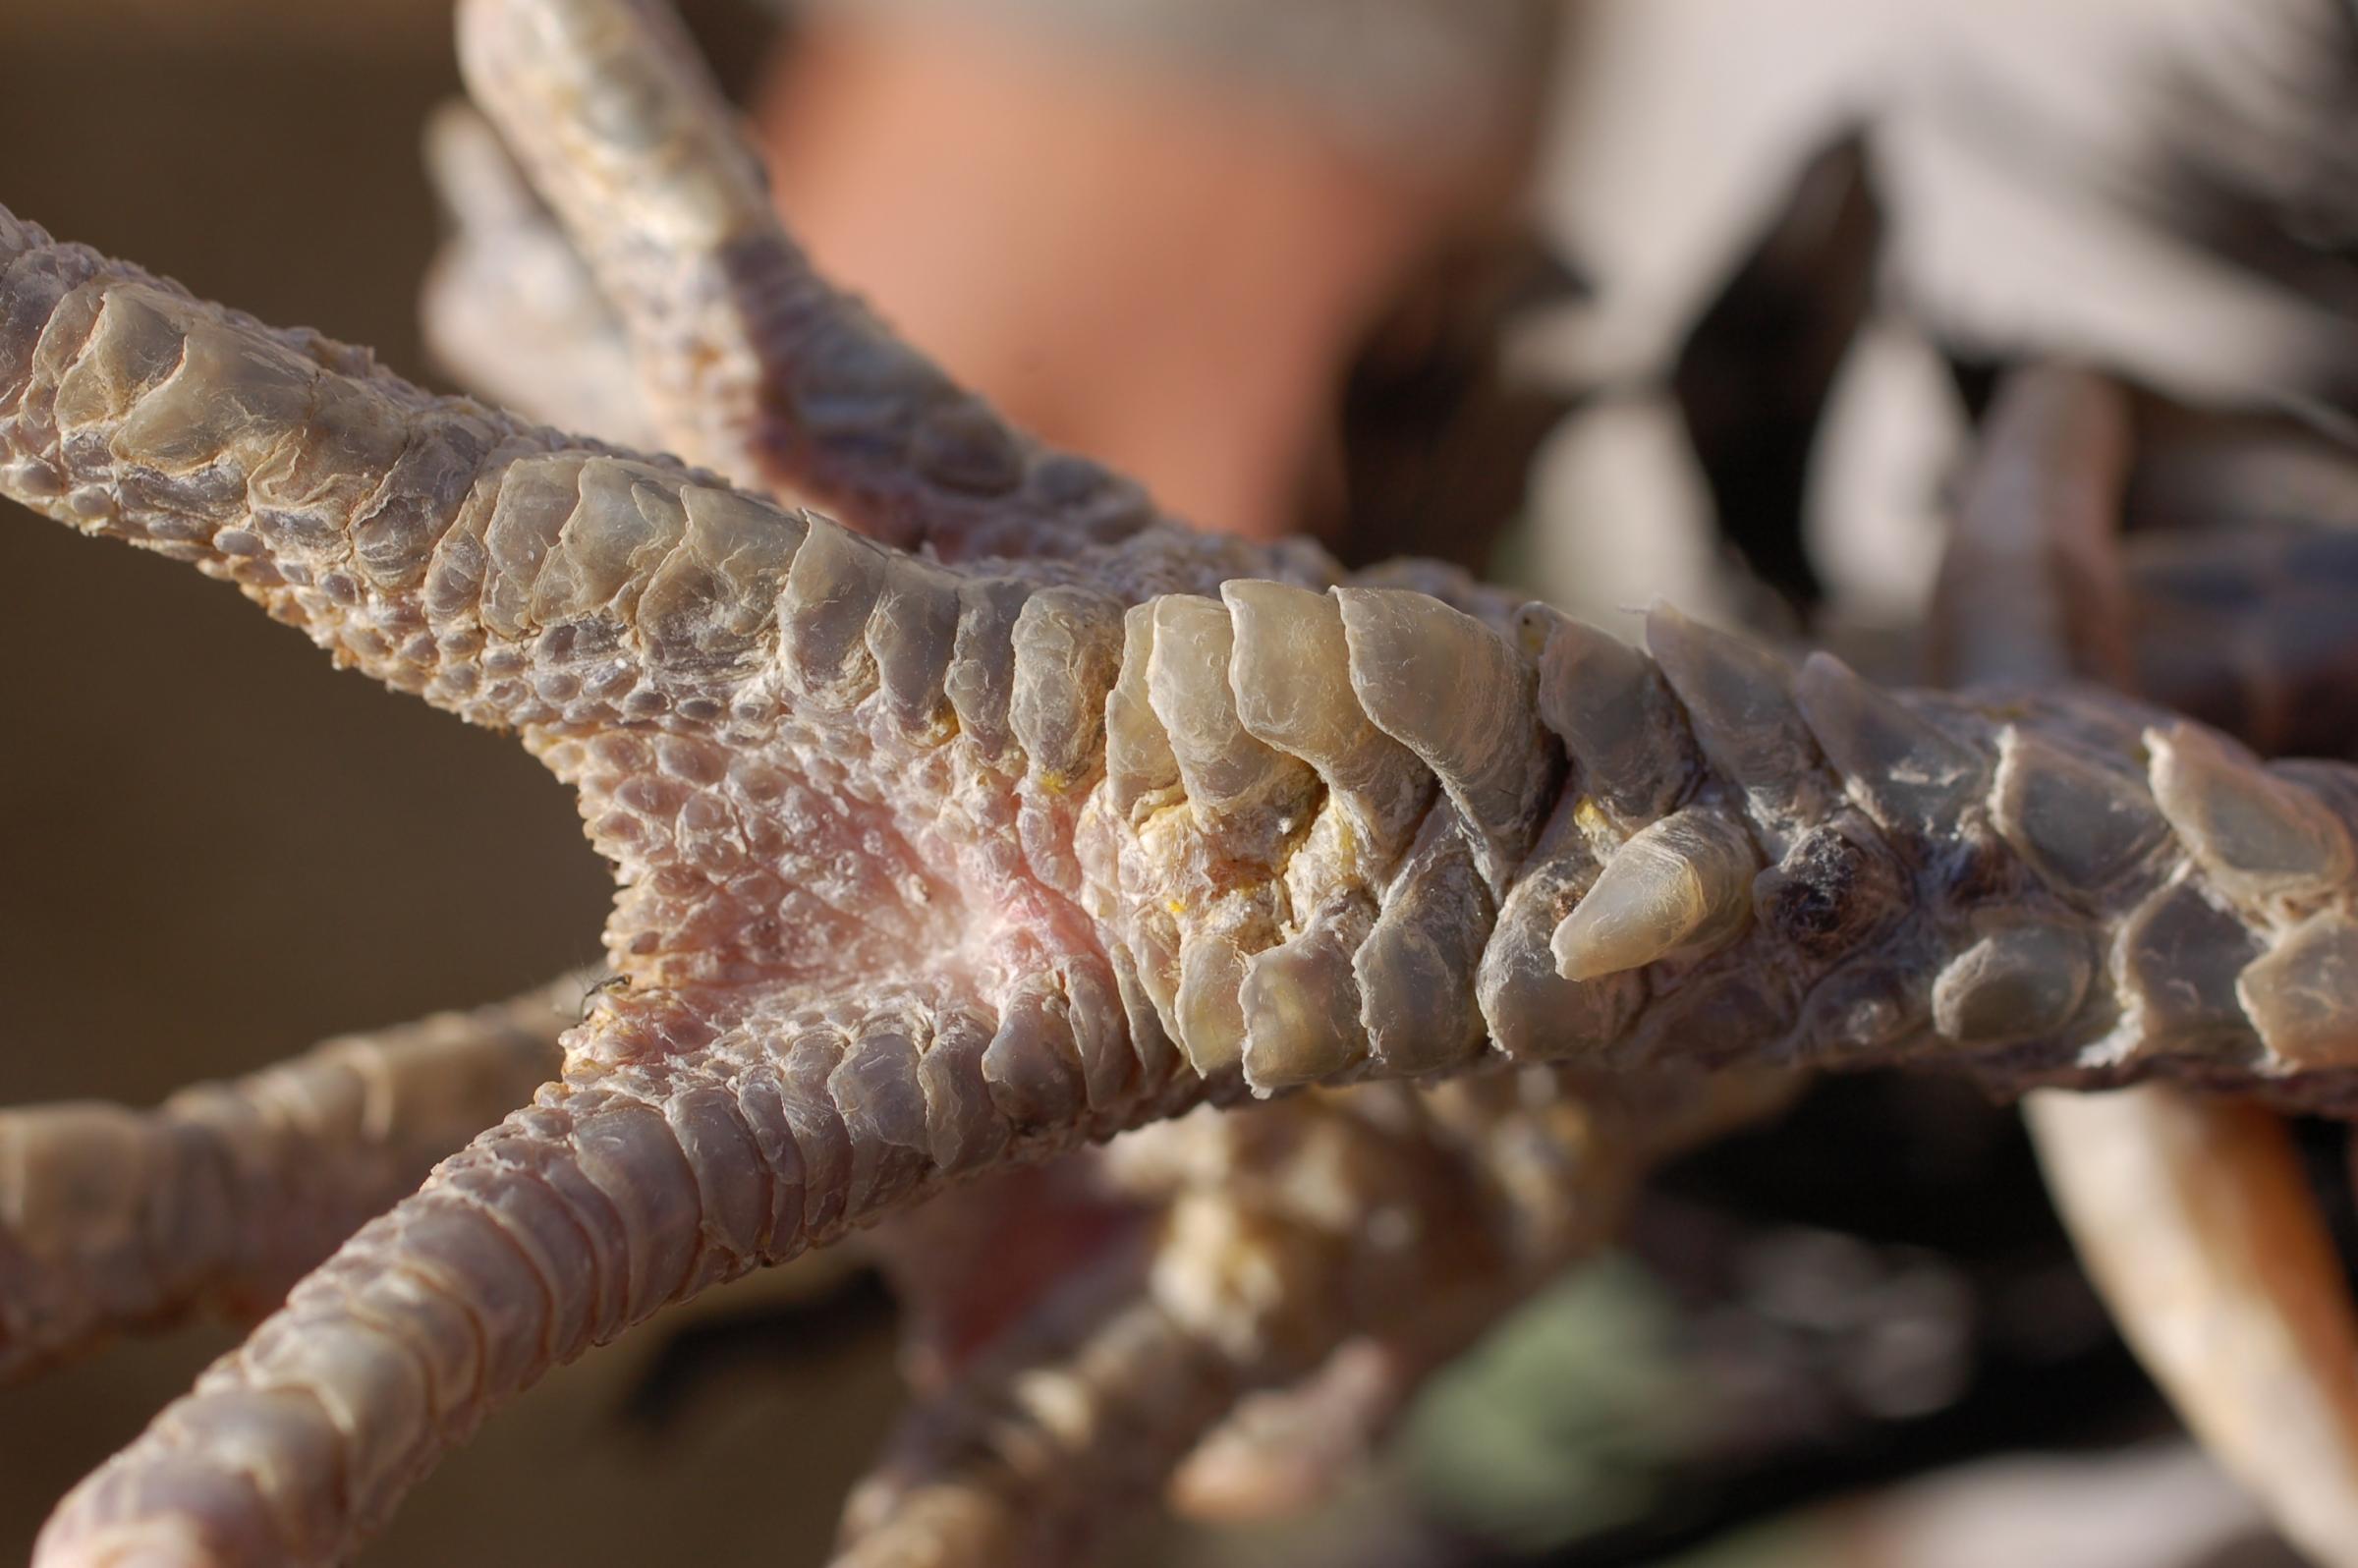 Scaly Leg is caused by a small external parasitic mite that burrows under the chicken leg scales